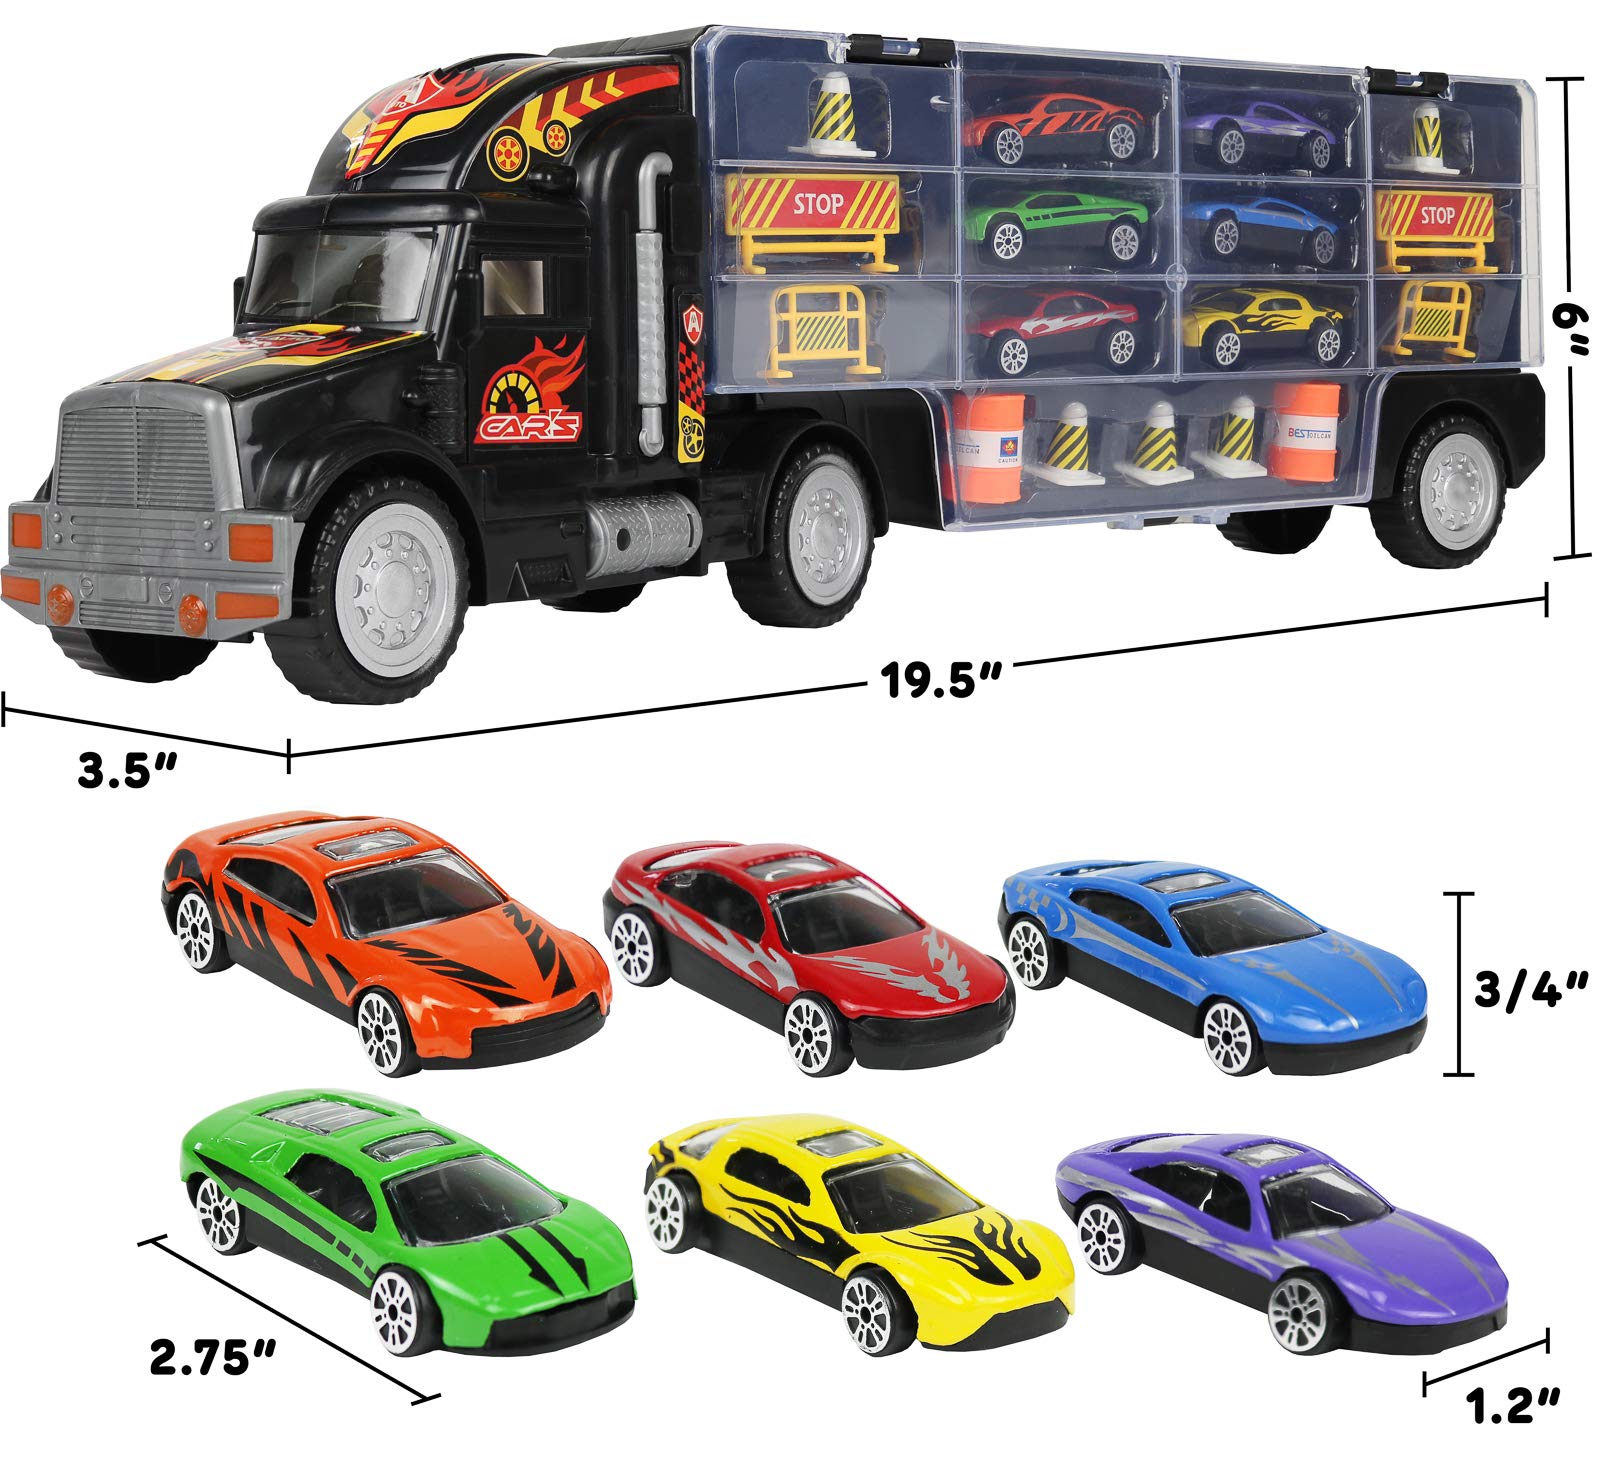 Click N' Play Transport Car Carrier Truck, Loaded with Cars, Road Signs & More. Holdup To 28 Cars. Jumbo 22" Long